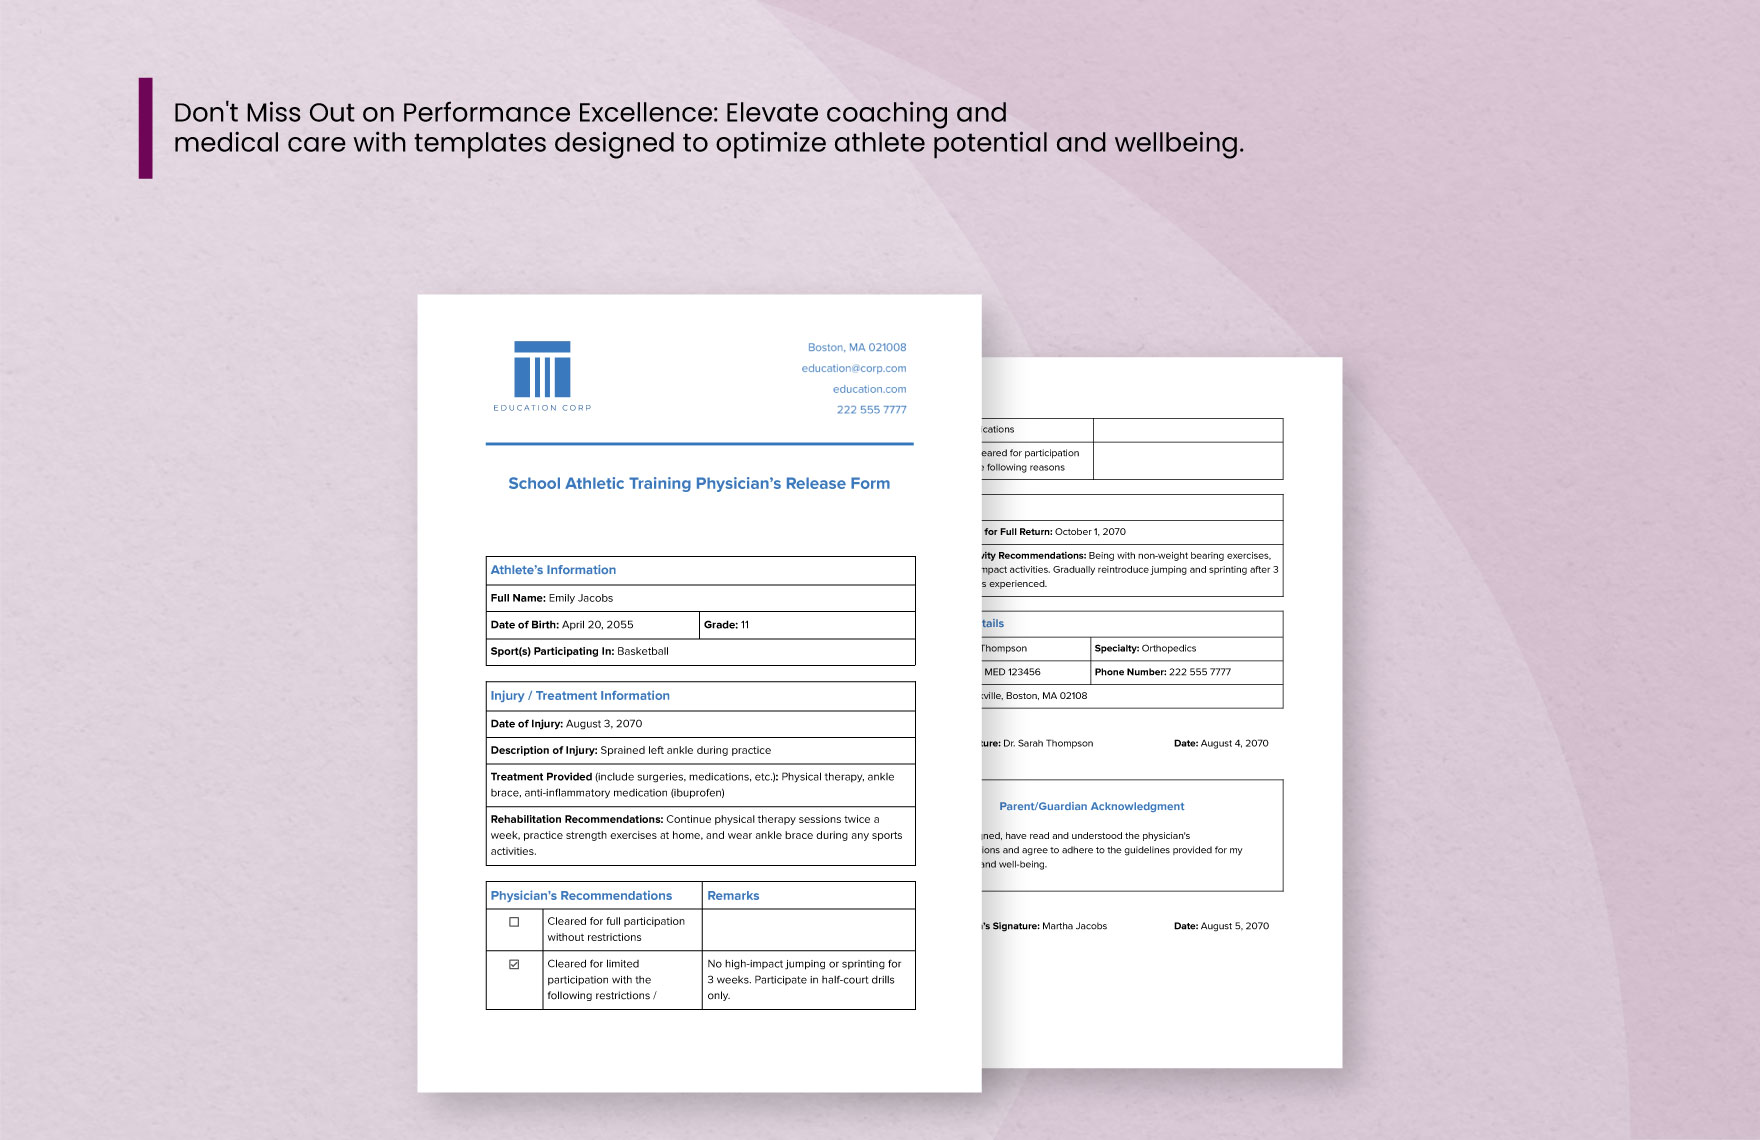 School Athletic Training Physician's Release Form Template